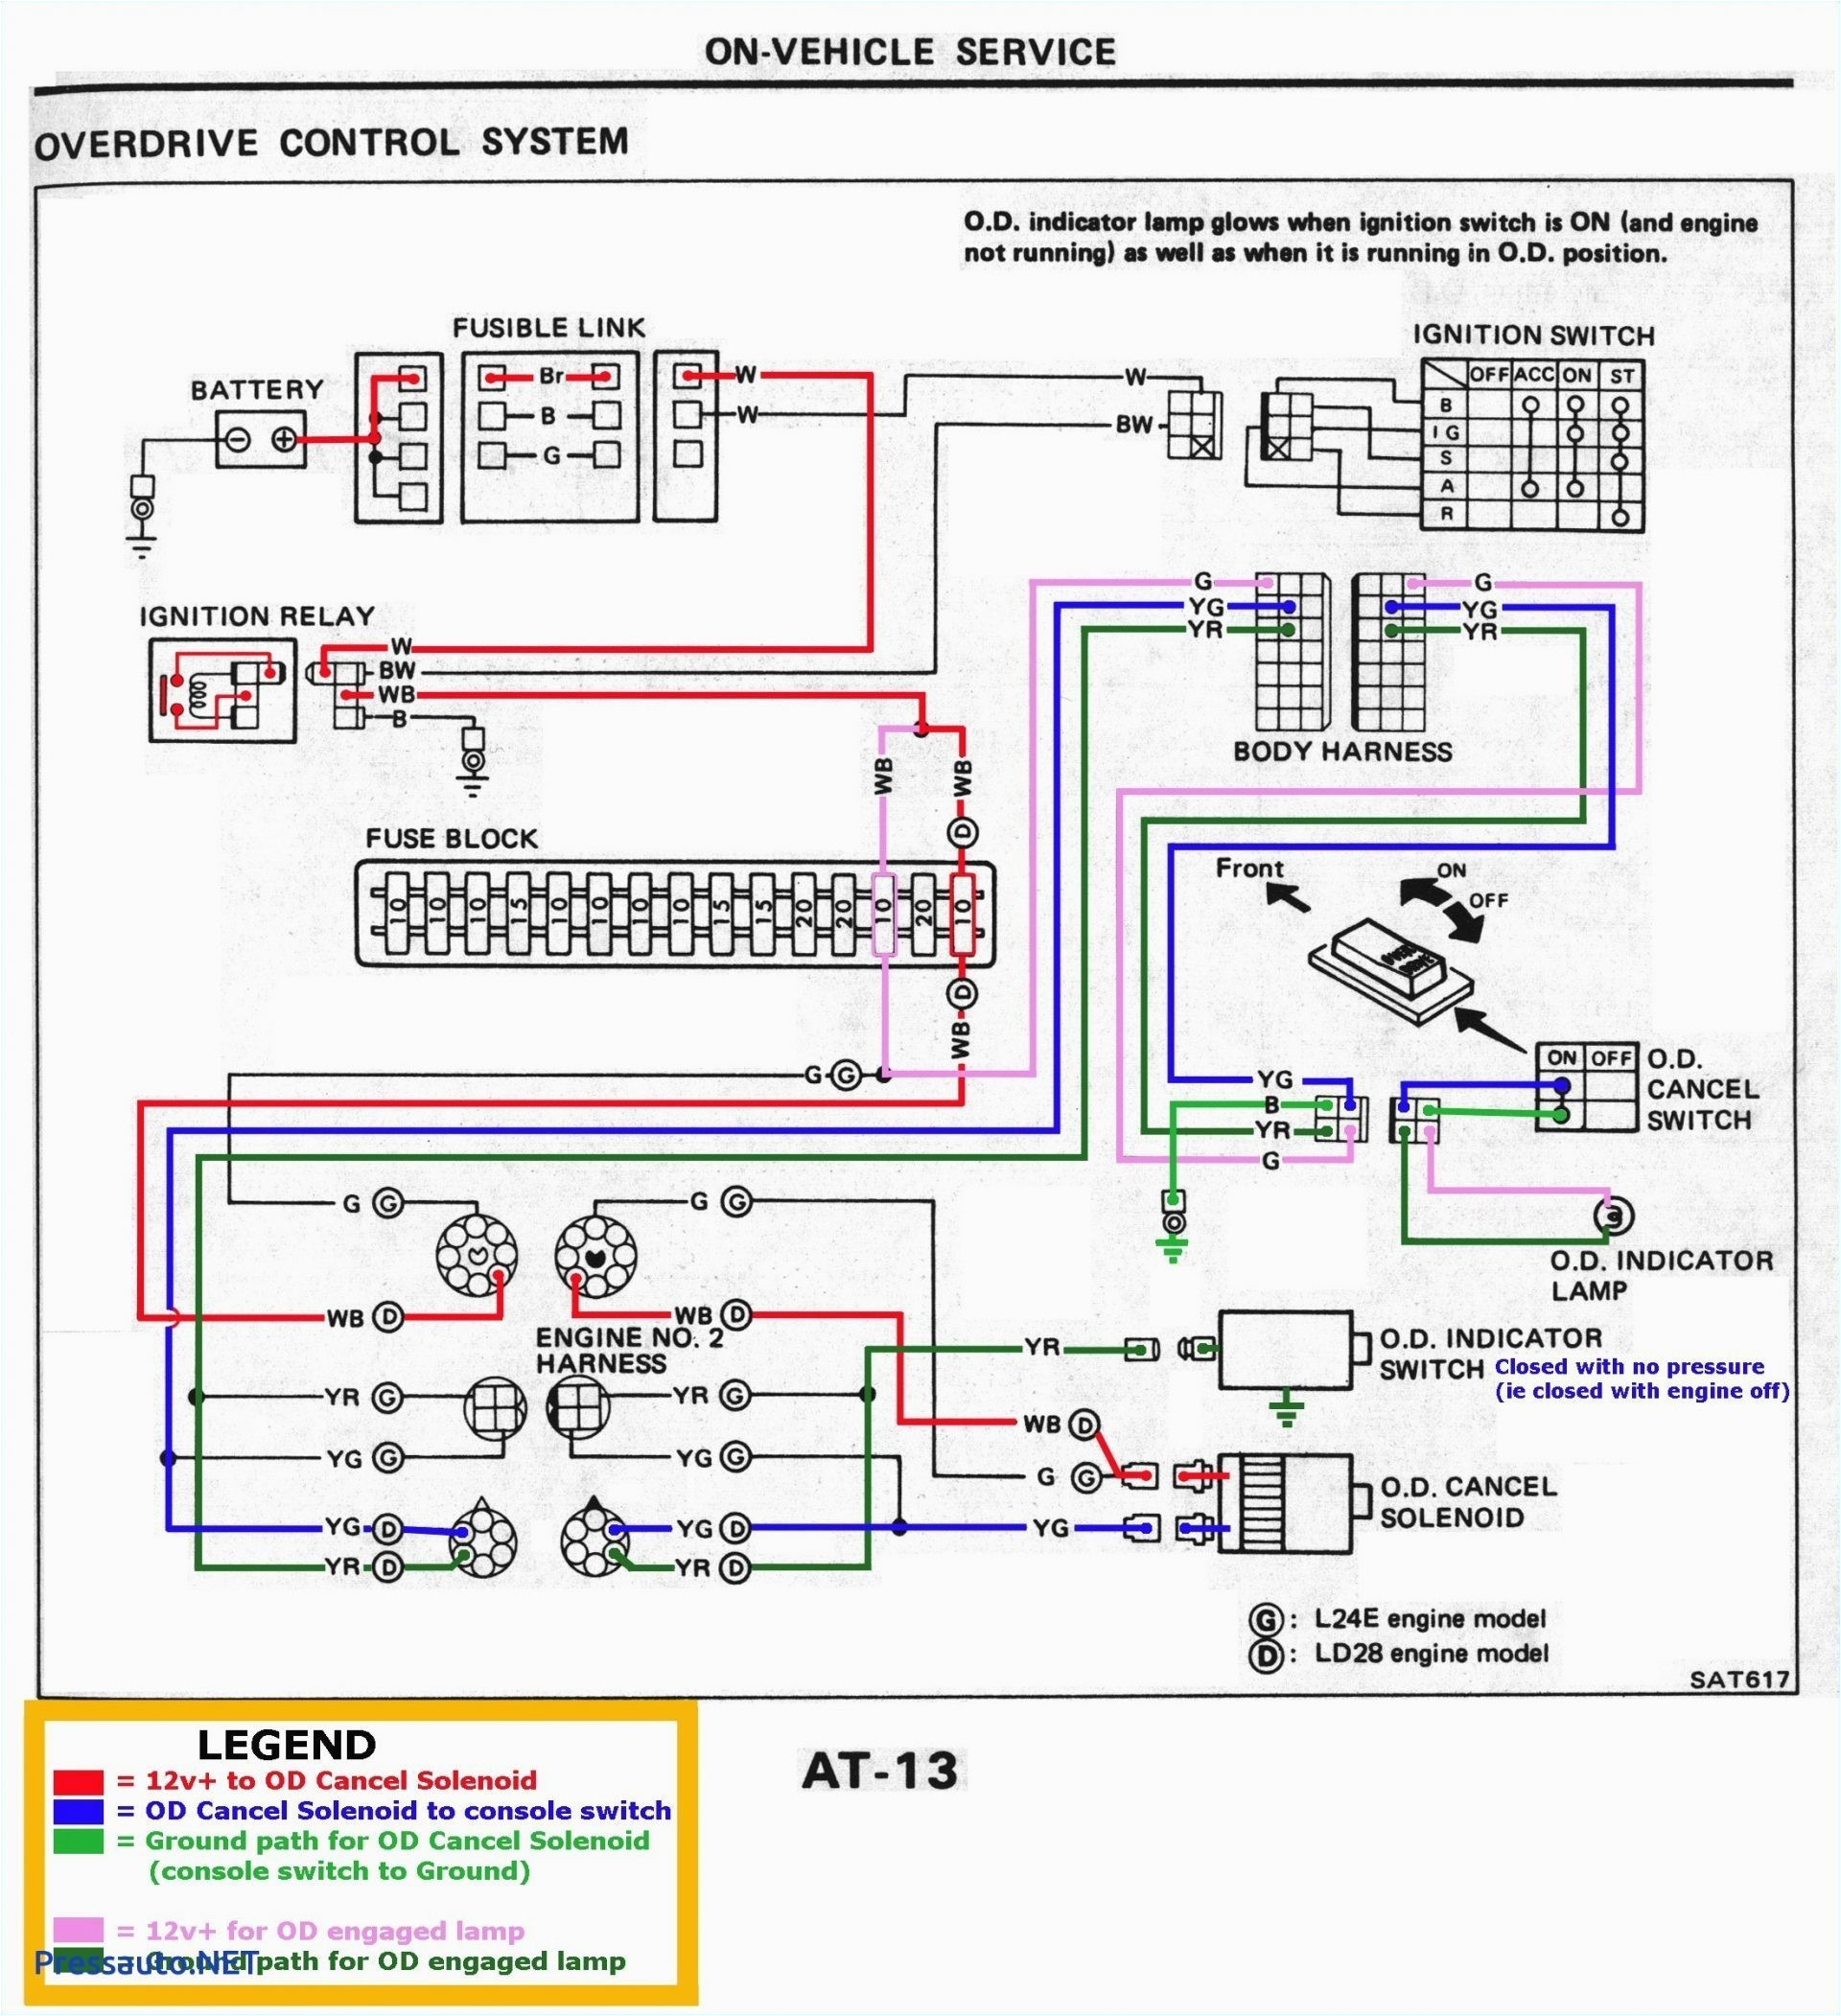 2001 tracker boat wiring diagram home wiring diagram 165 tracker boat wiring diagram